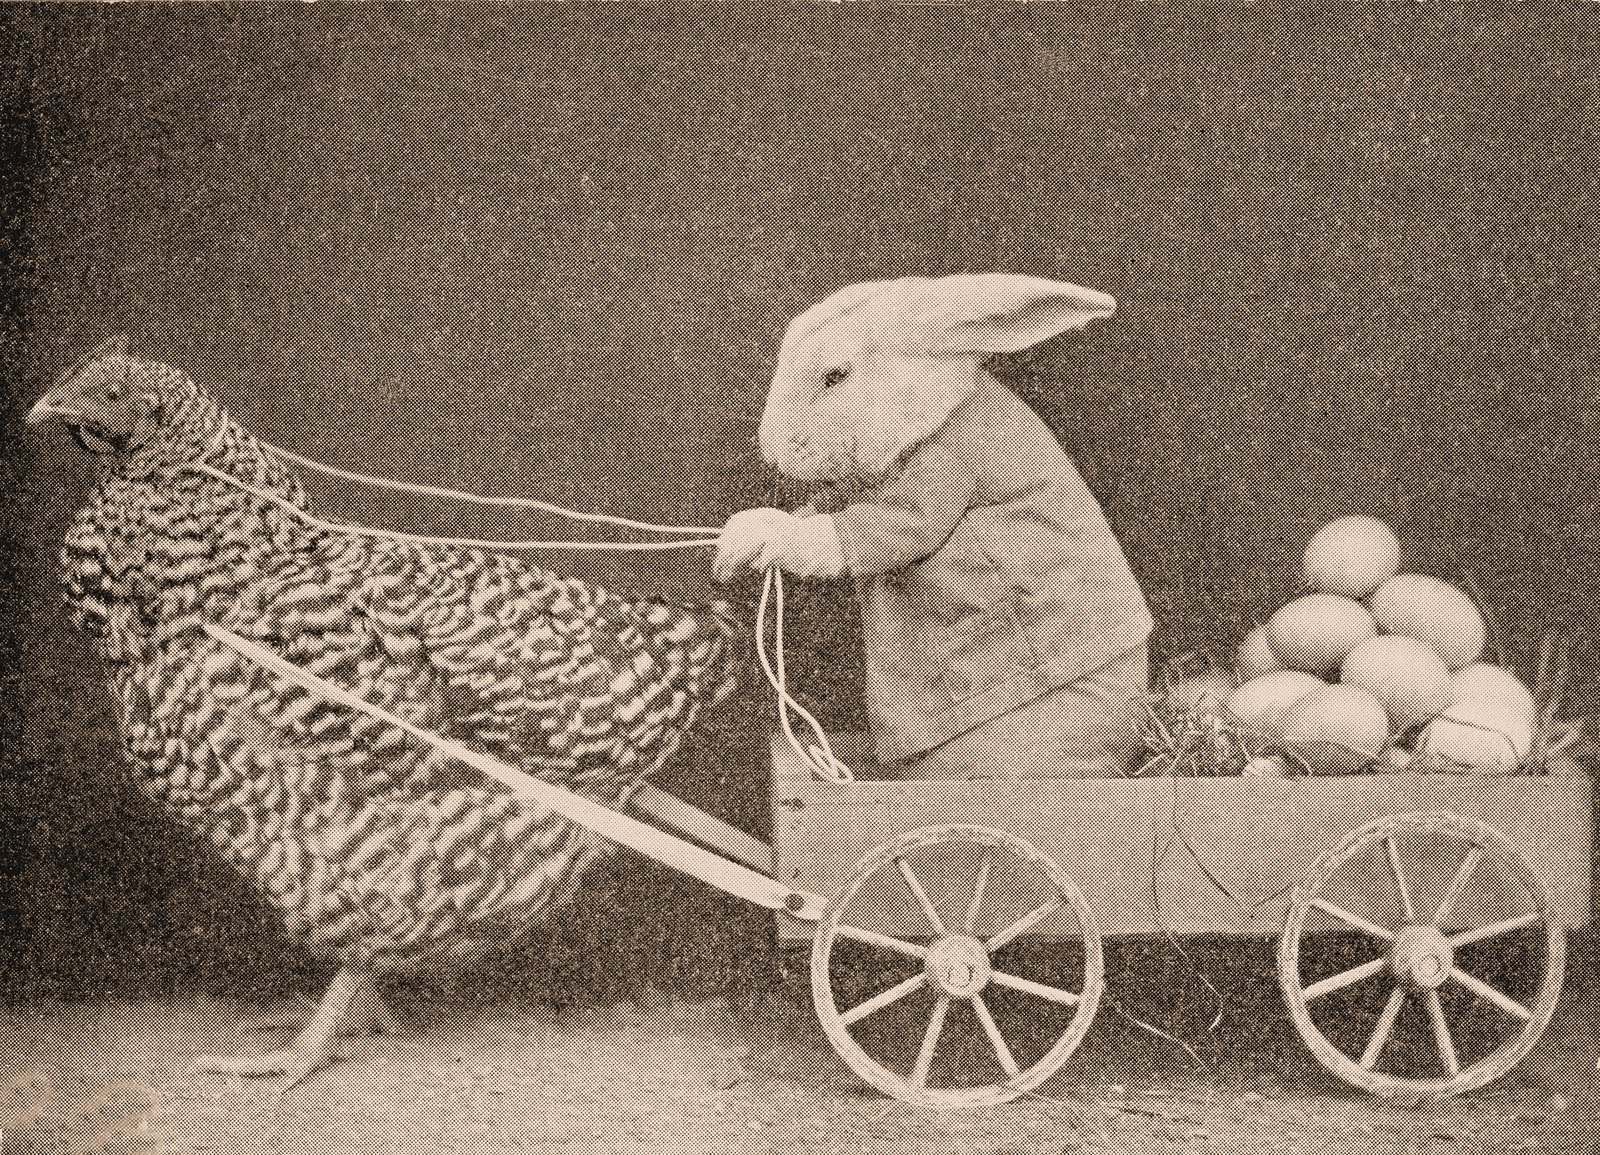 The Perversion of The Easter Bunny: 1907 To Today